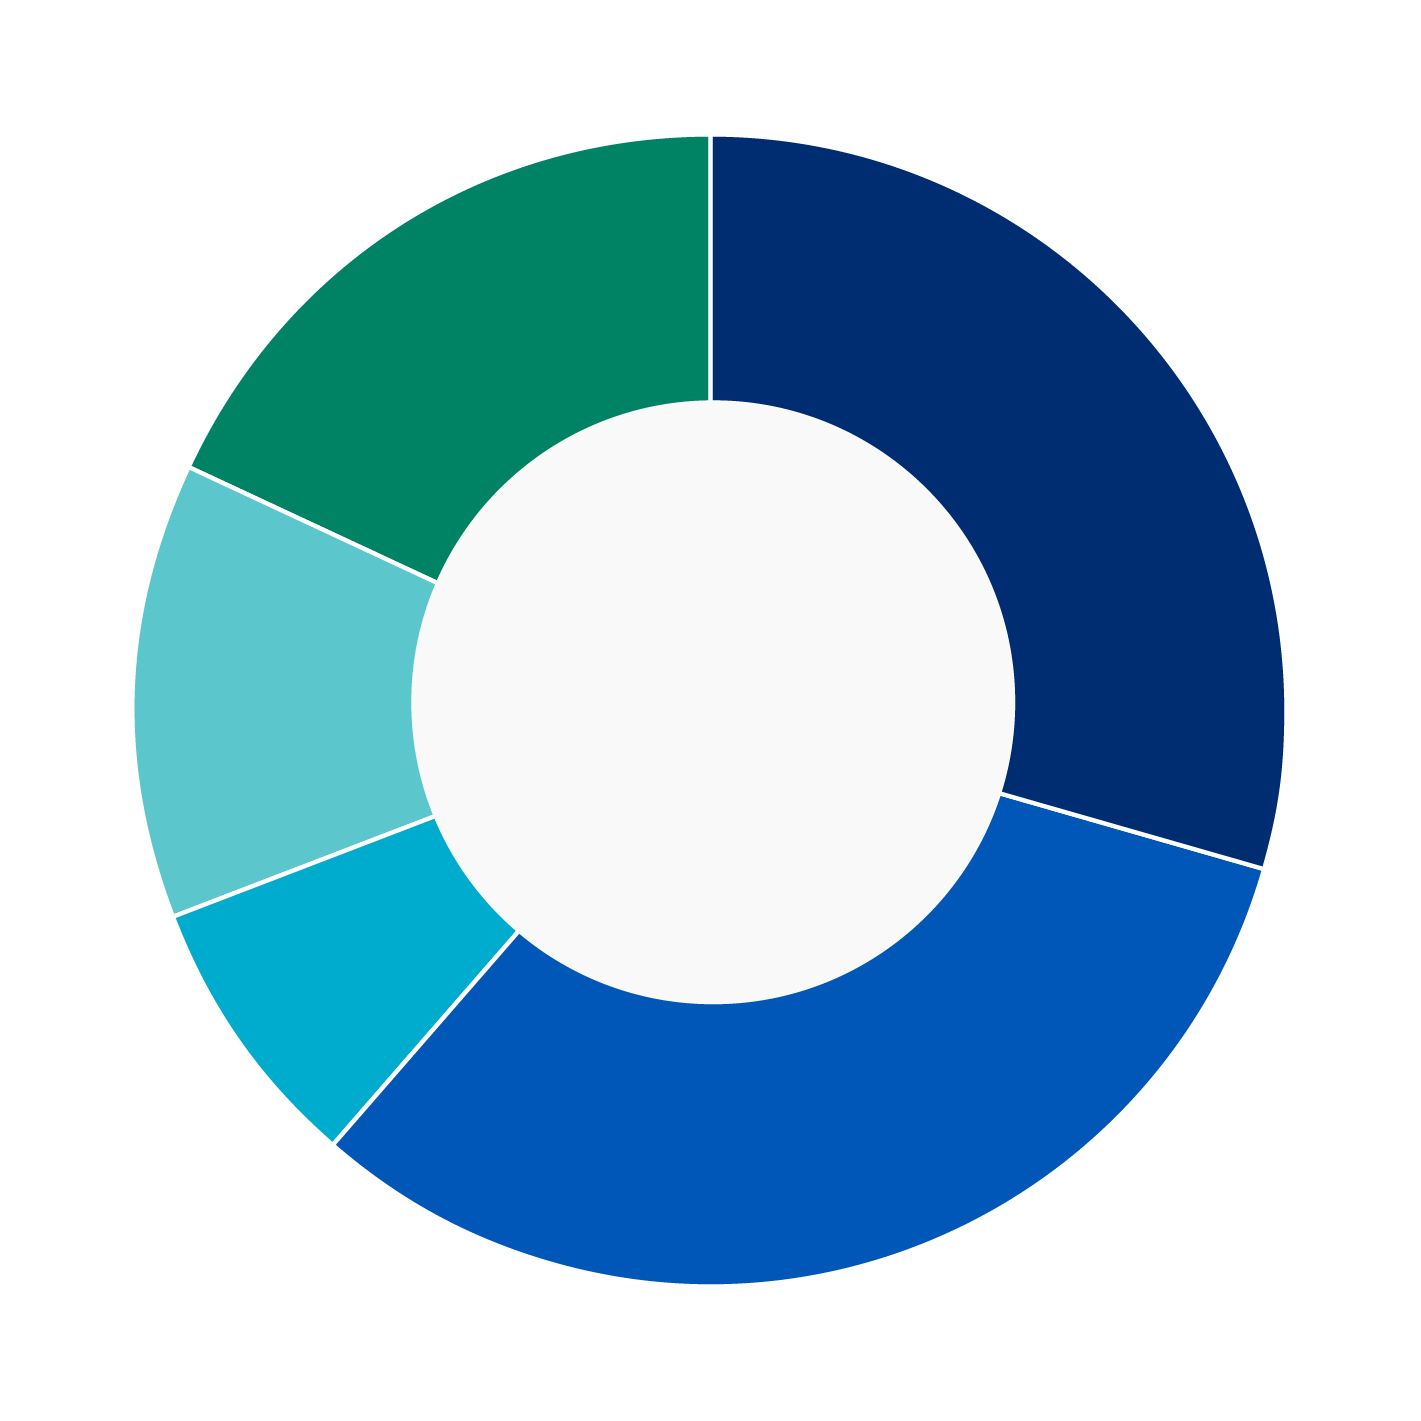 This donut chart shows the percentage of assets allocated to each fund as a percentage of the whole.